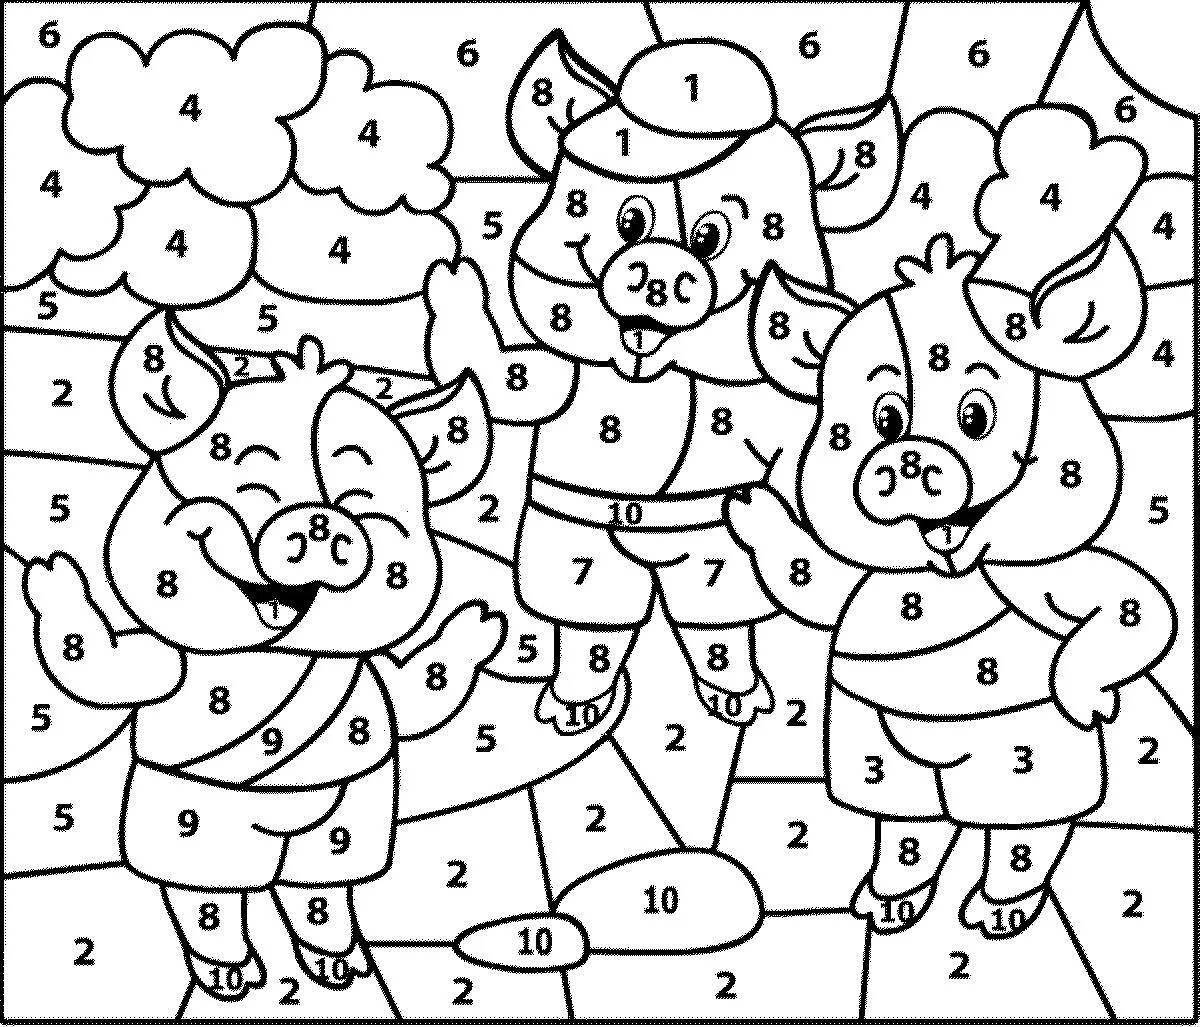 Bright coloring book for children aged 6 7